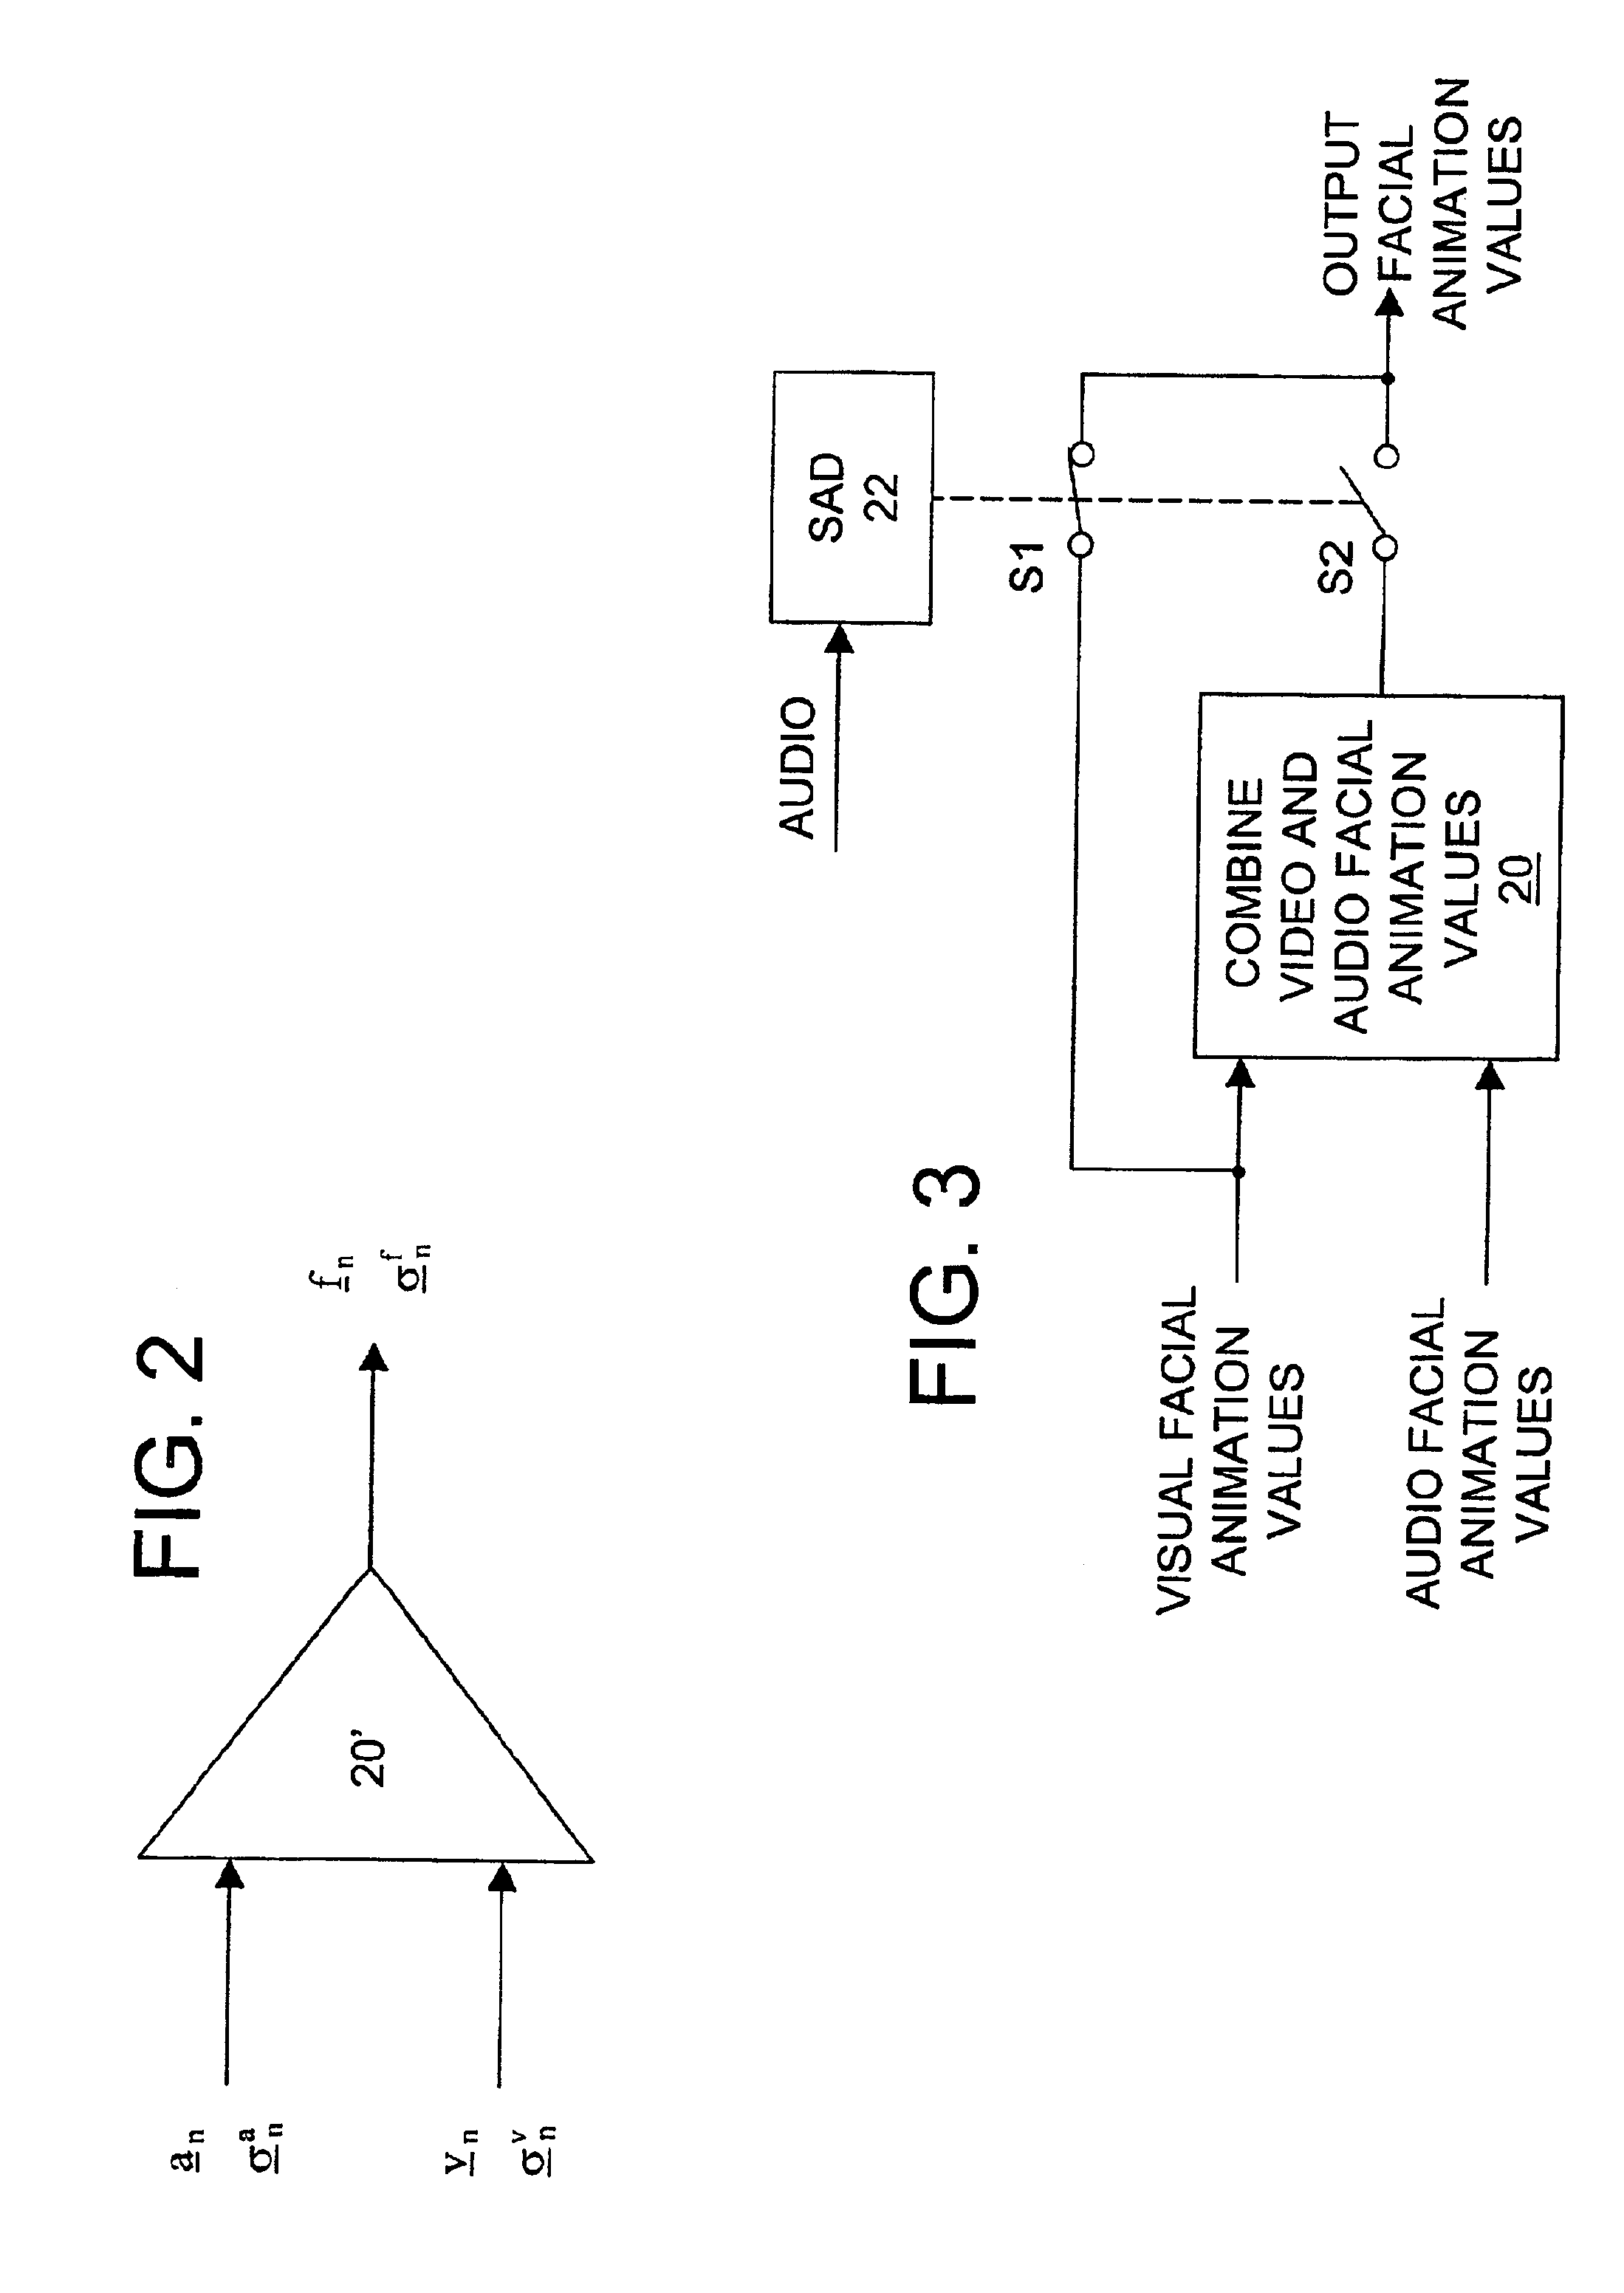 Method and system for generating facial animation values based on a combination of visual and audio information